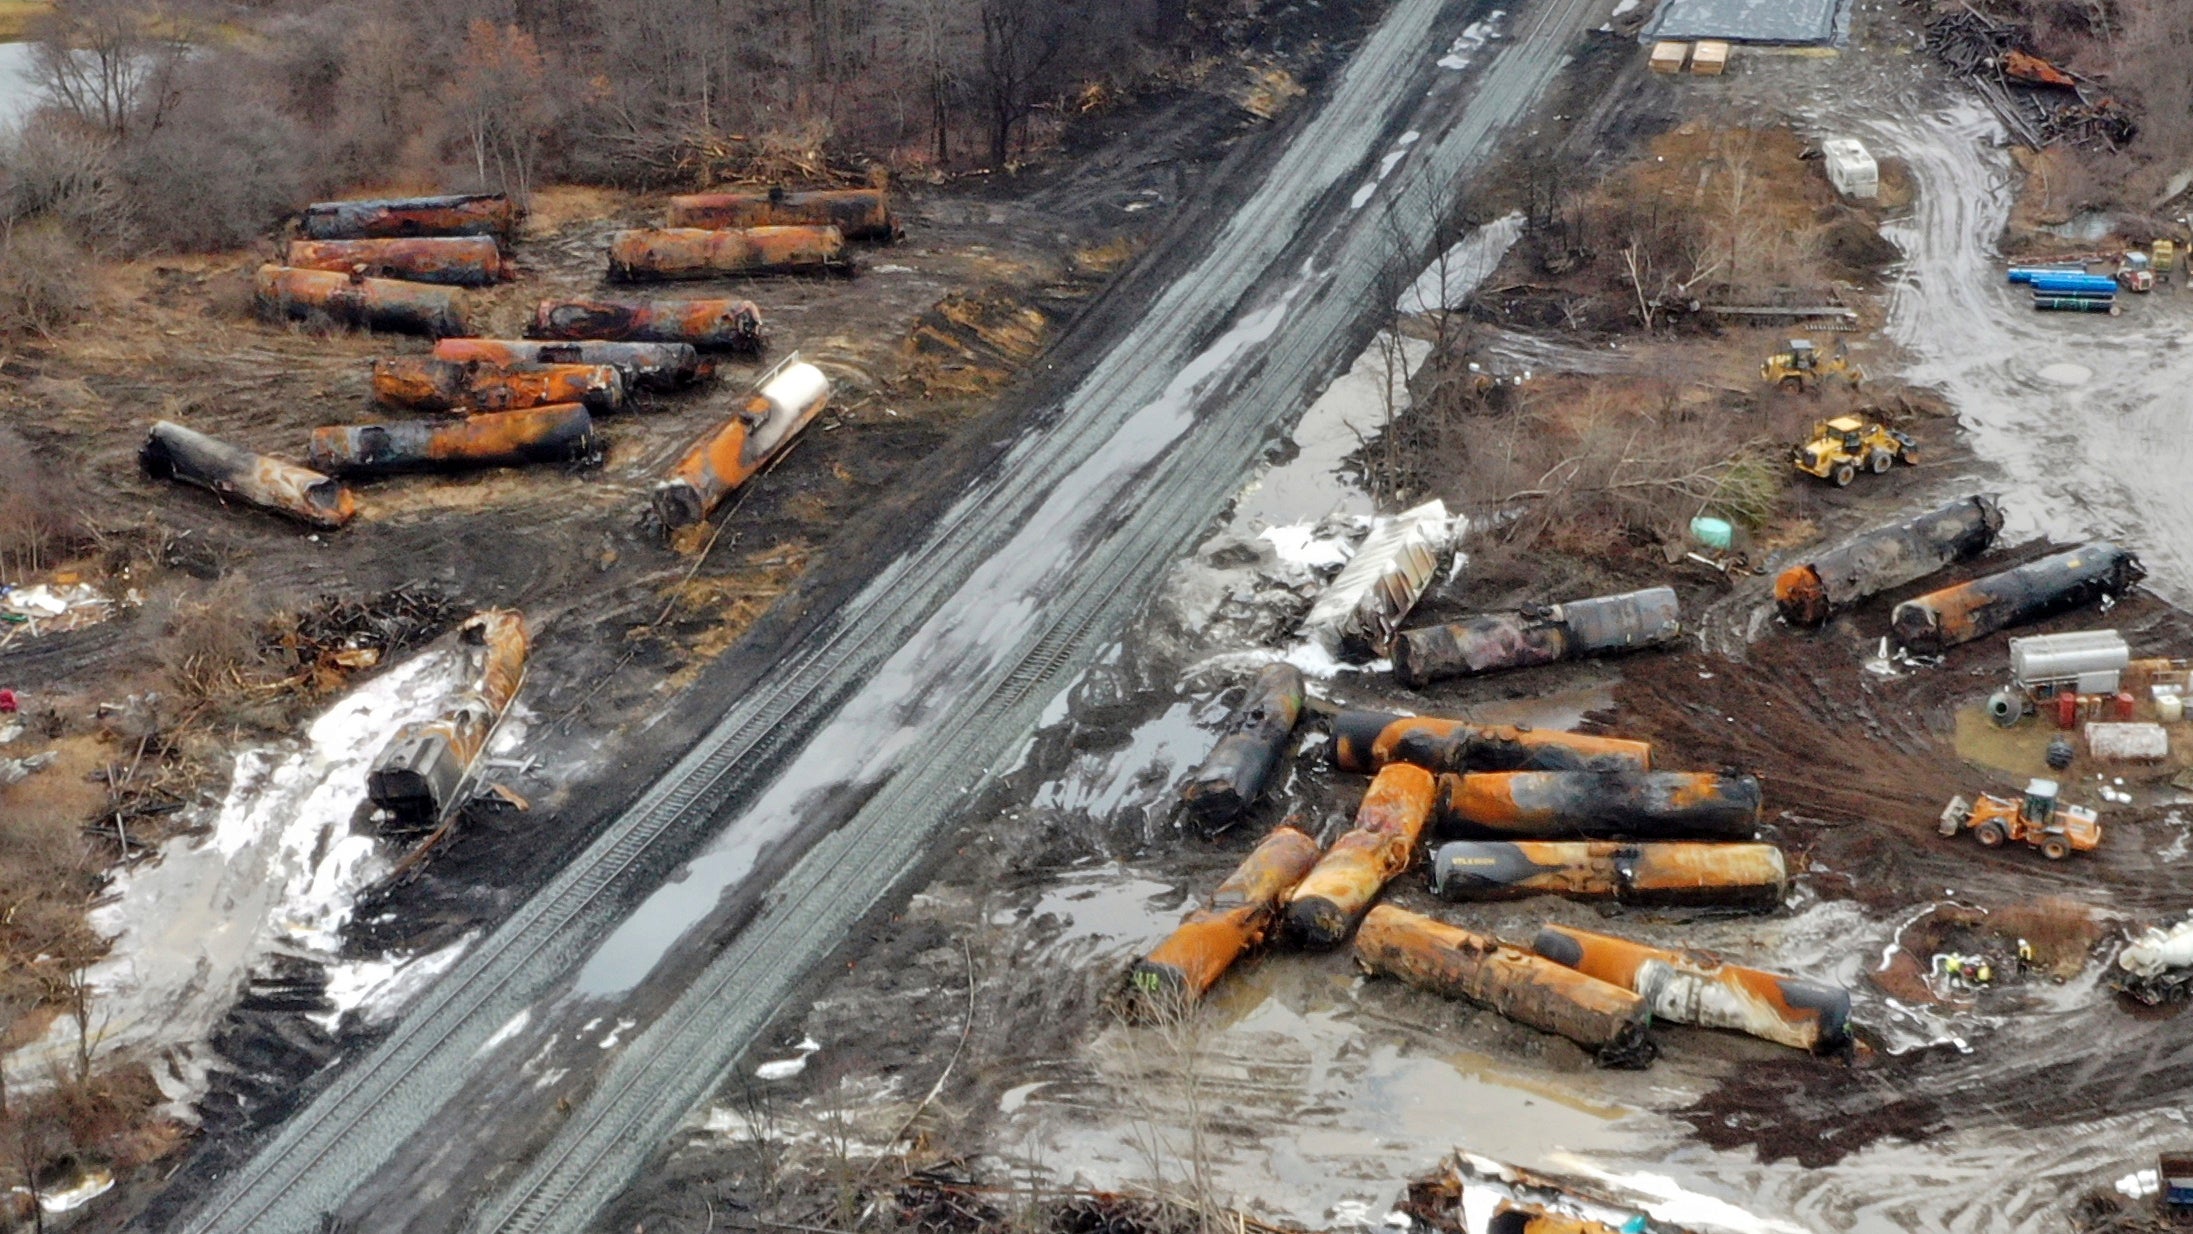 The site of the Norfolk Southern train derailment in East Palestine, Ohio